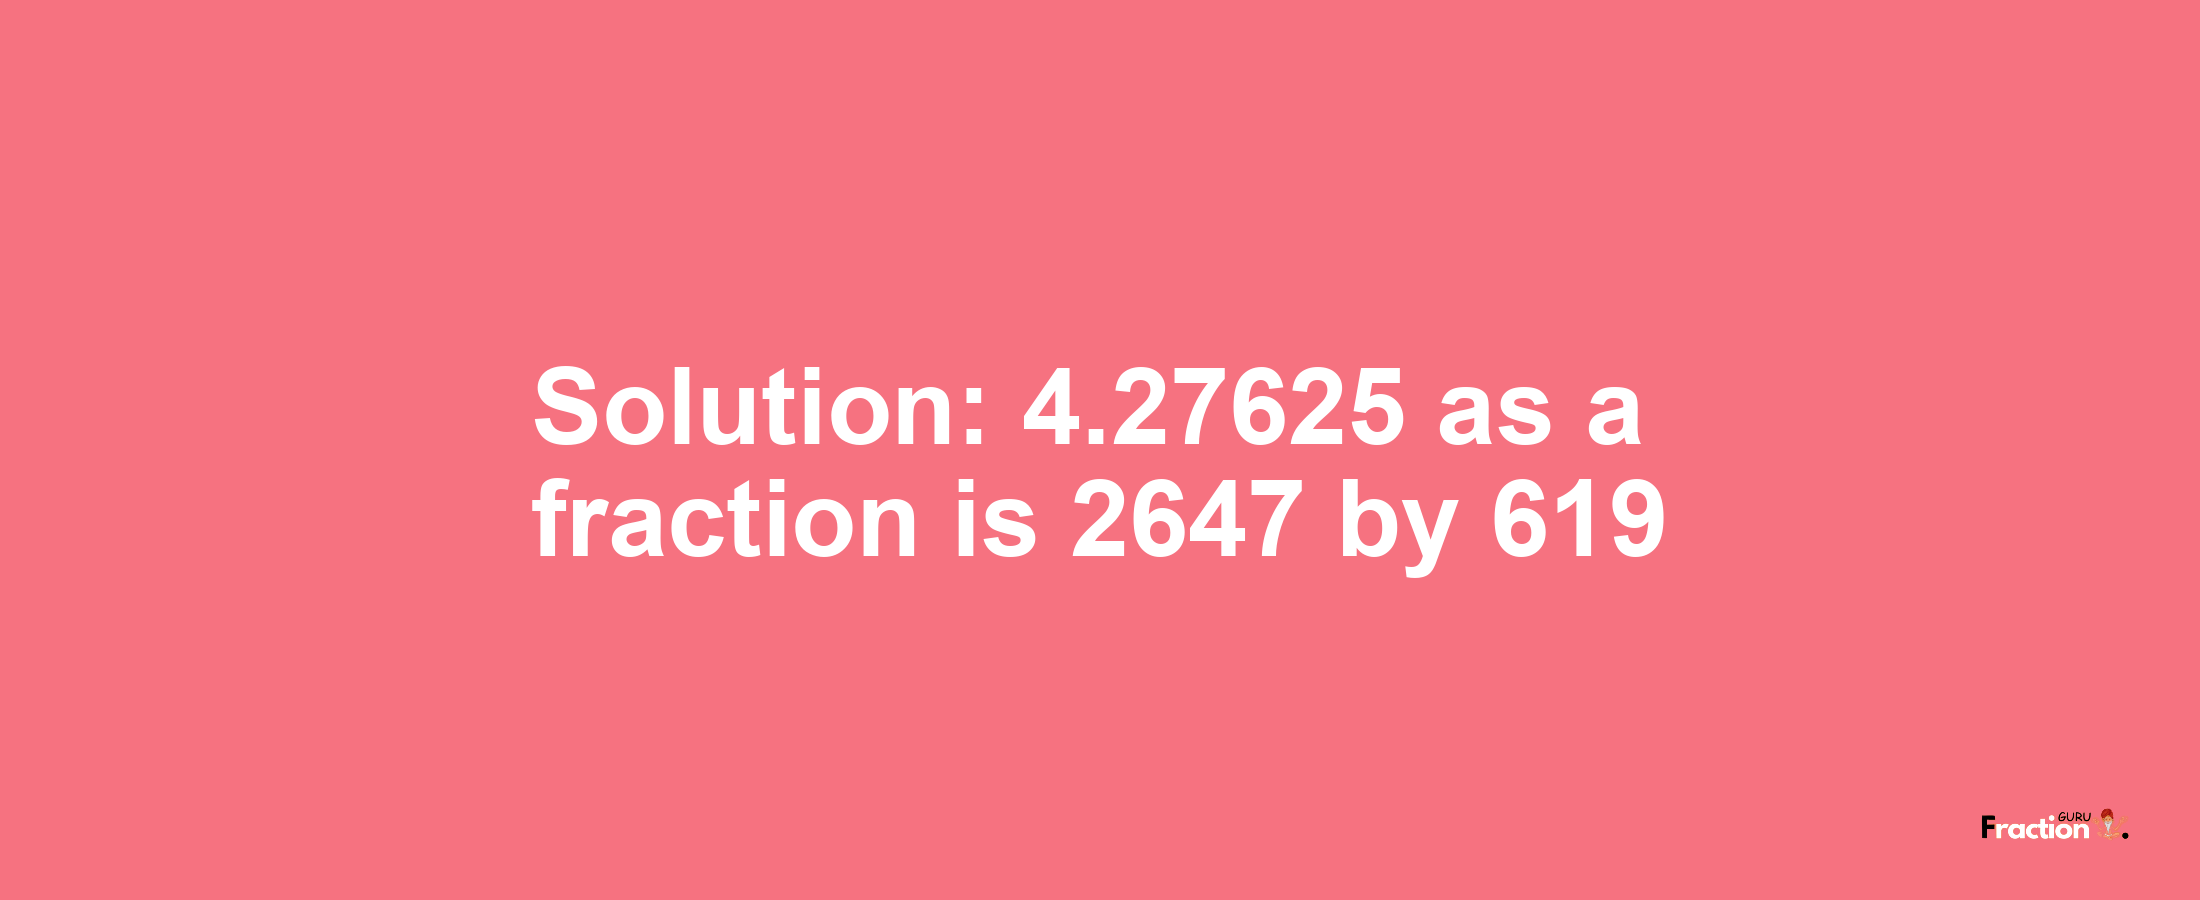 Solution:4.27625 as a fraction is 2647/619